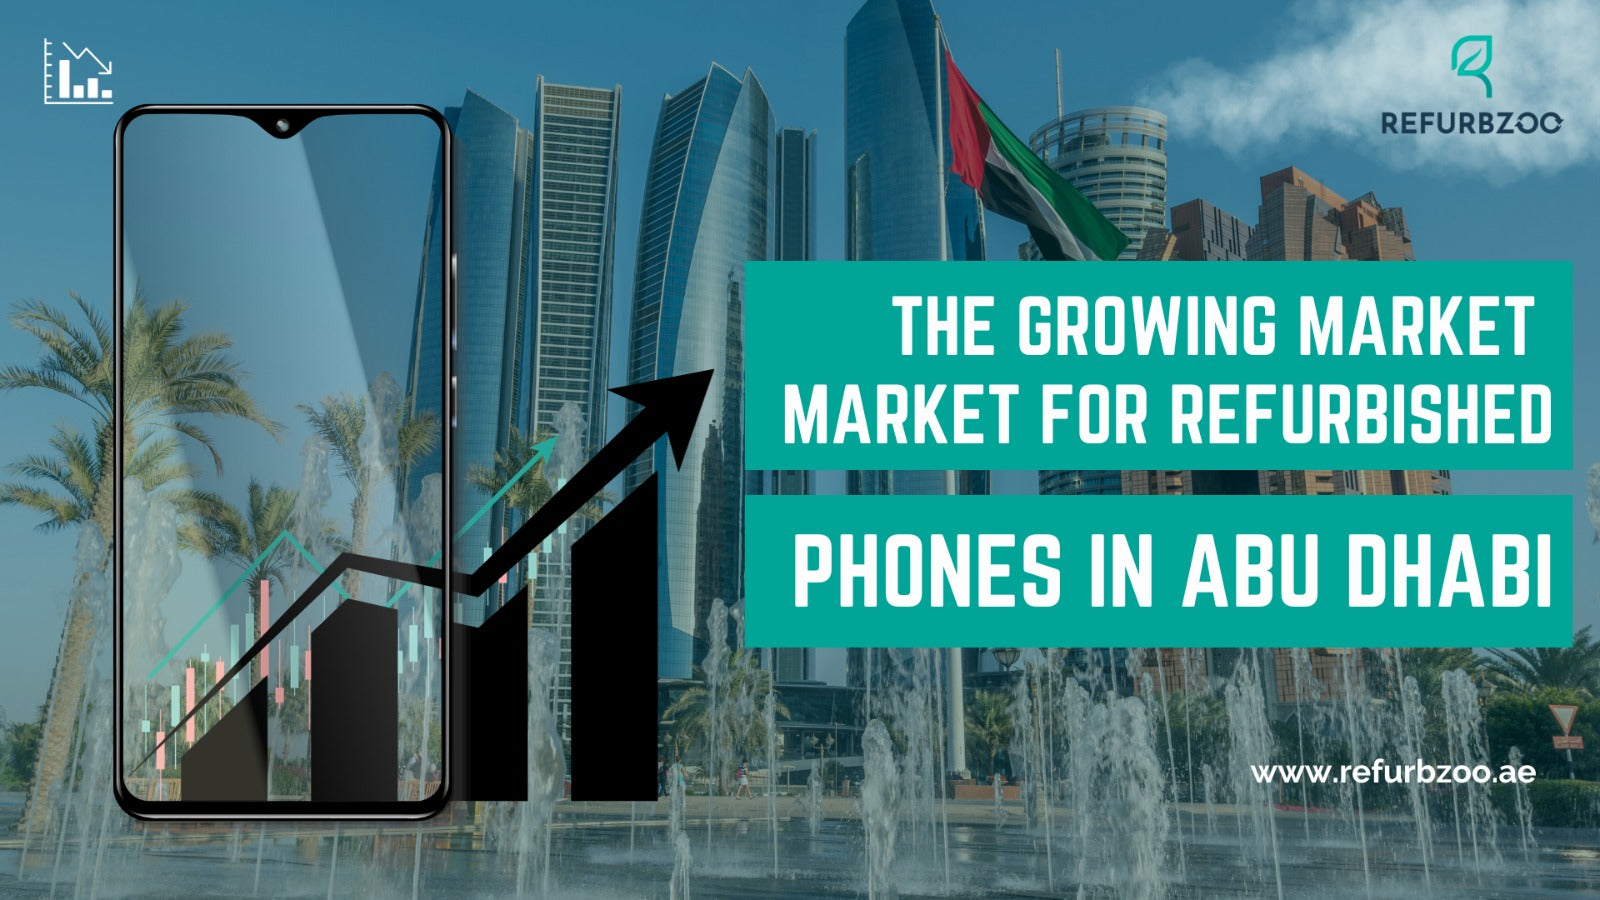 The growing market for refurbished phones in Abu Dhabi: A global trend